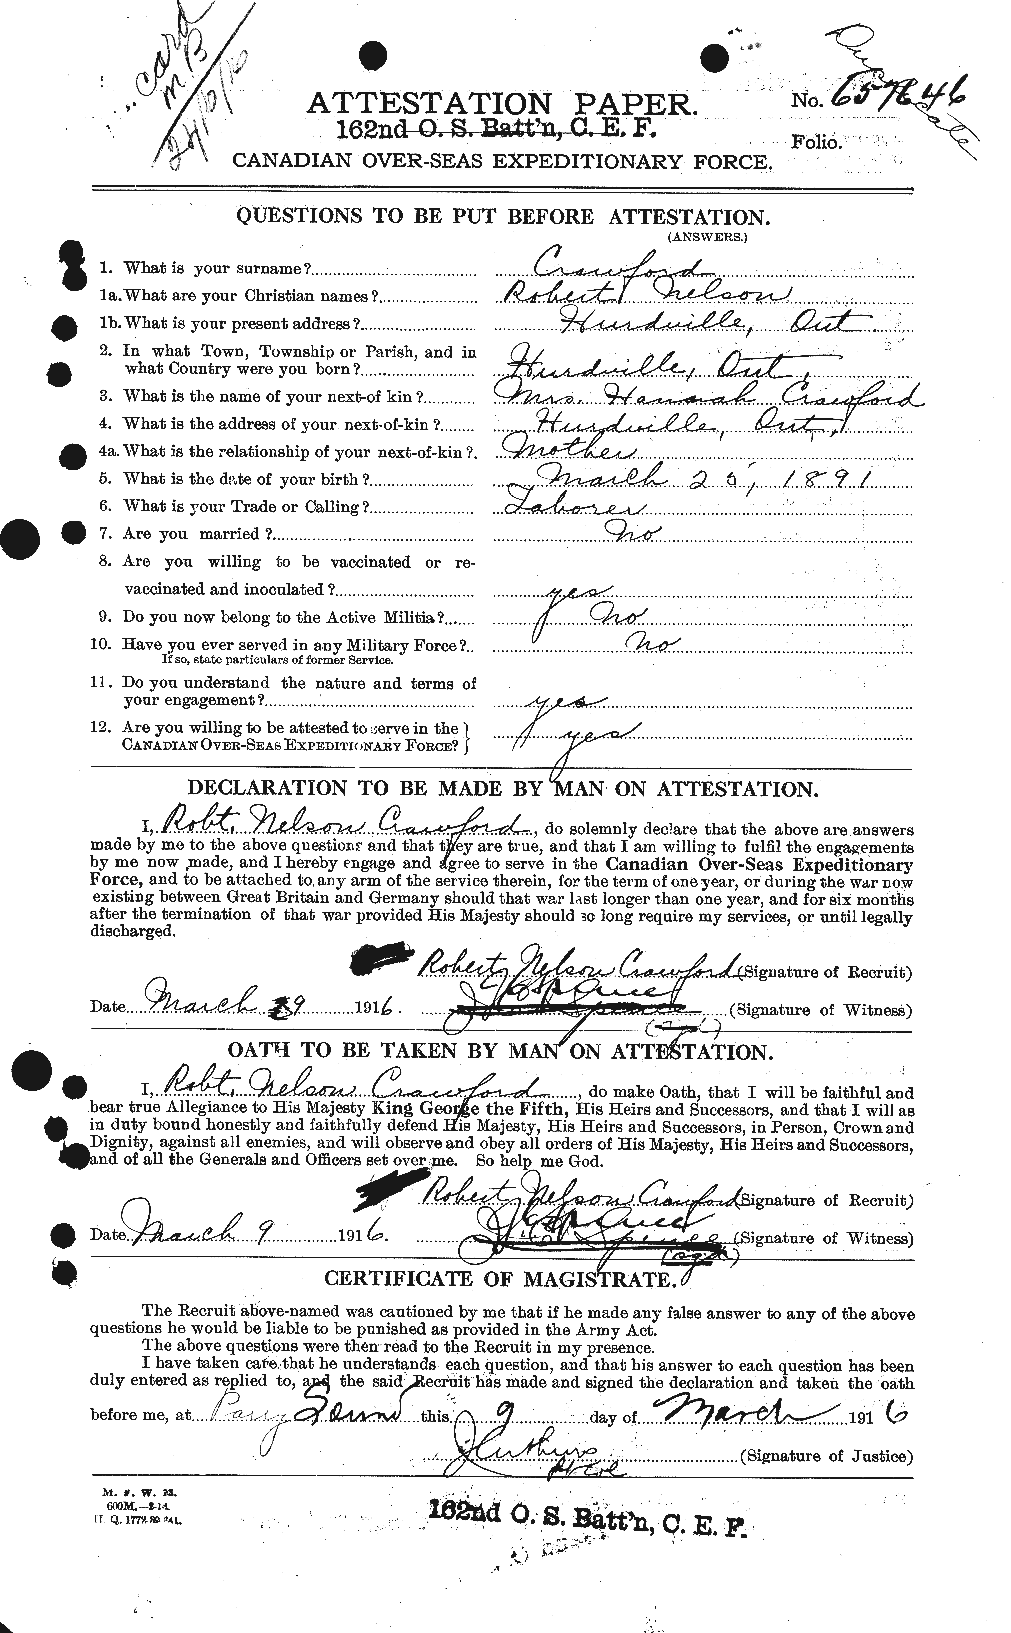 Personnel Records of the First World War - CEF 061614a